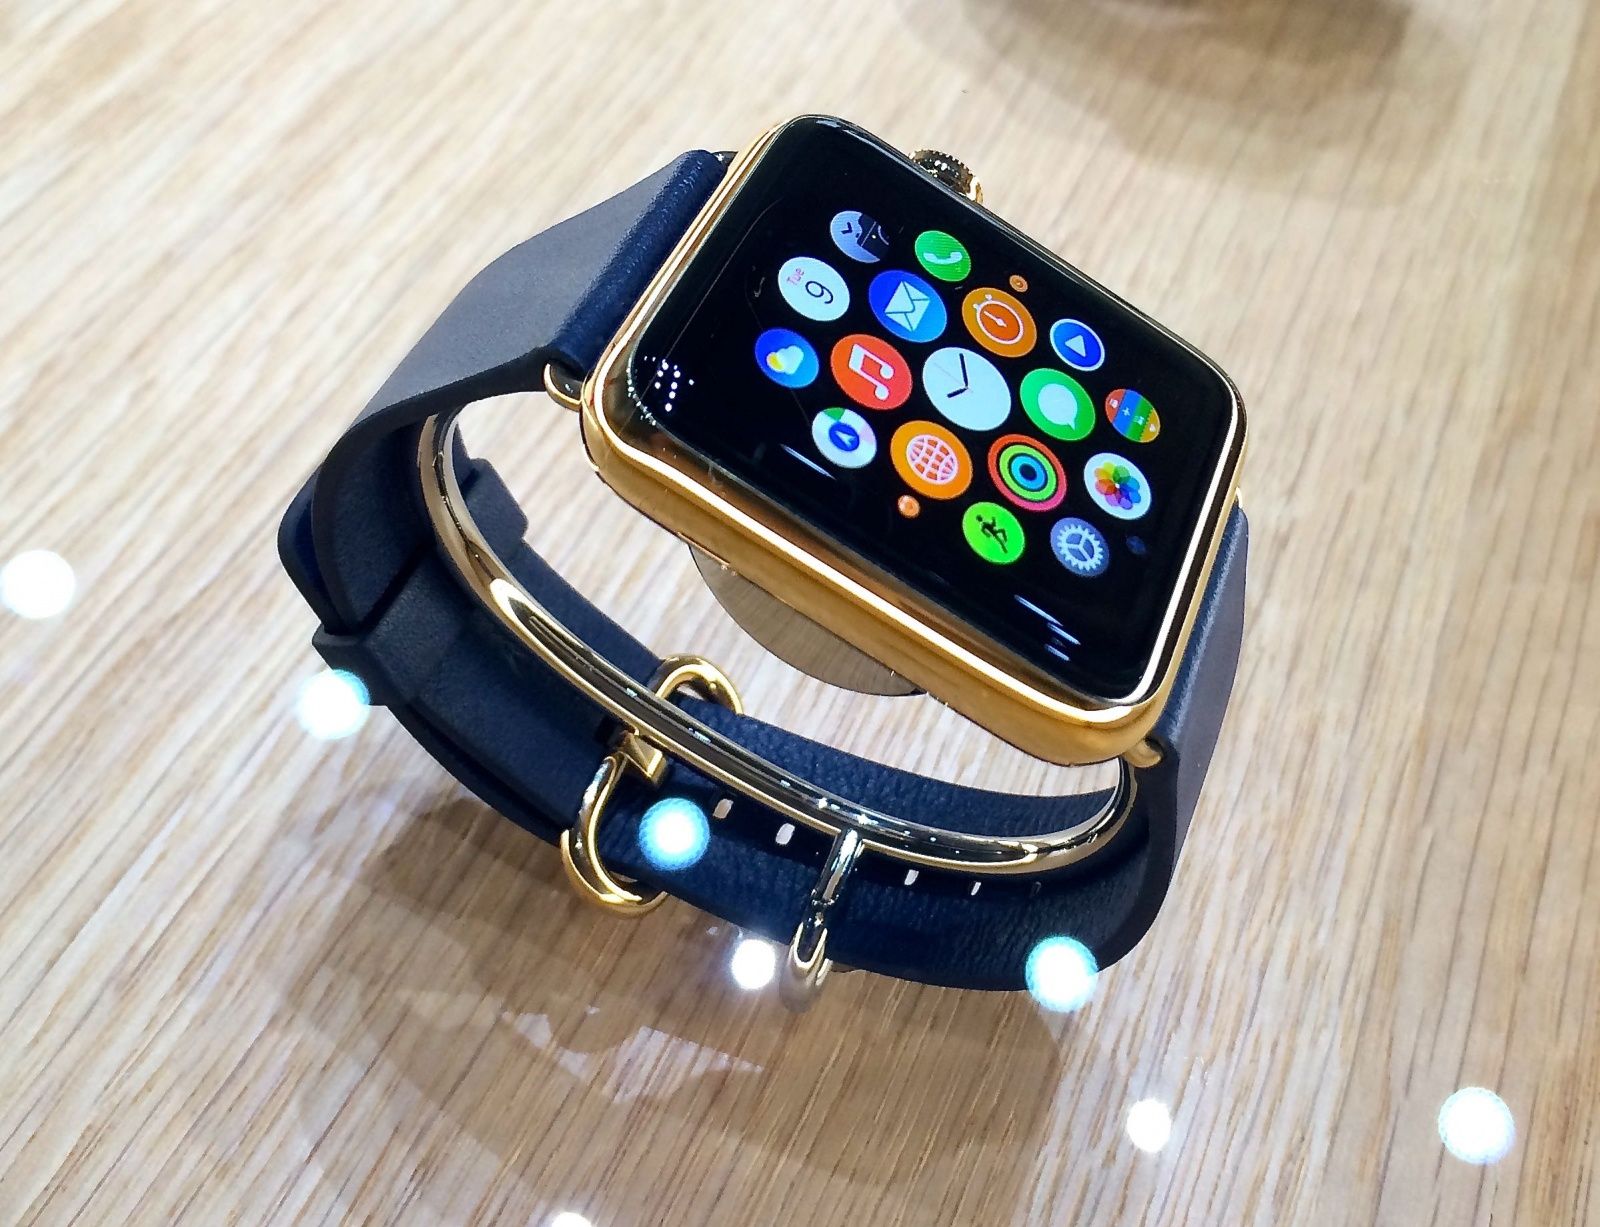 apple-watch-sales-training-material-leaked_05